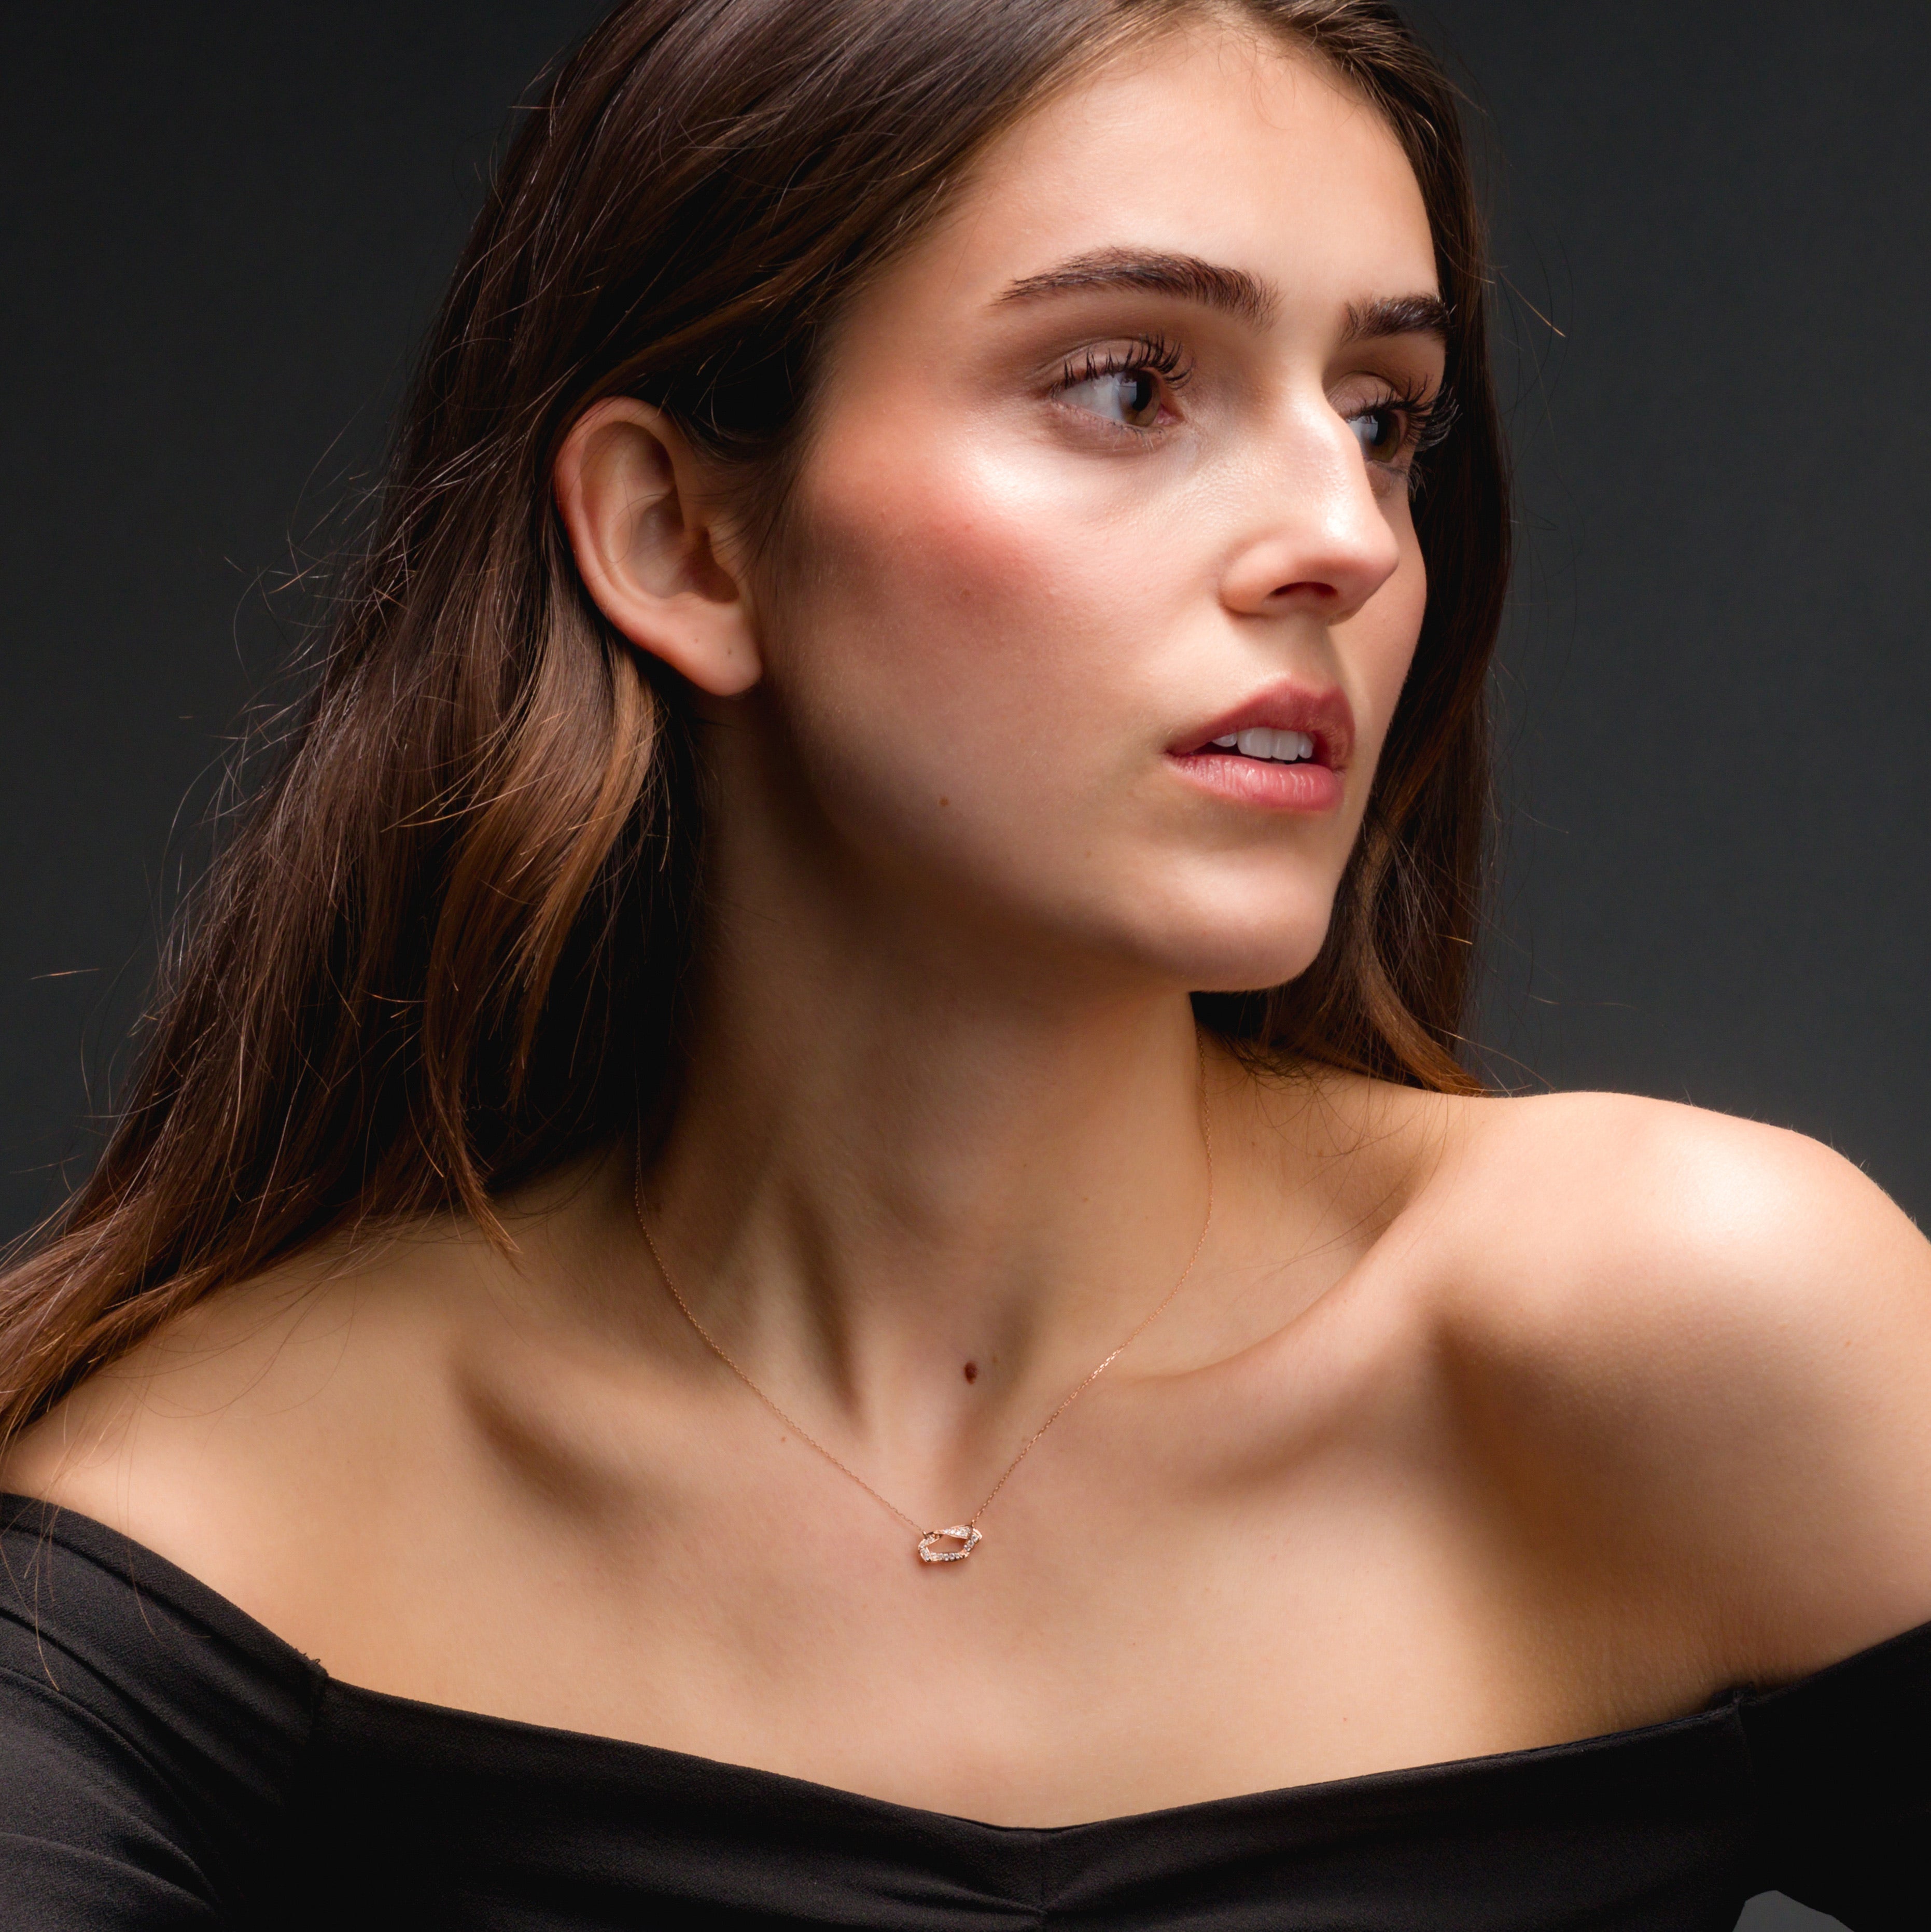 Forever Necklace In 18K Solid Rose Gold With Diamonds